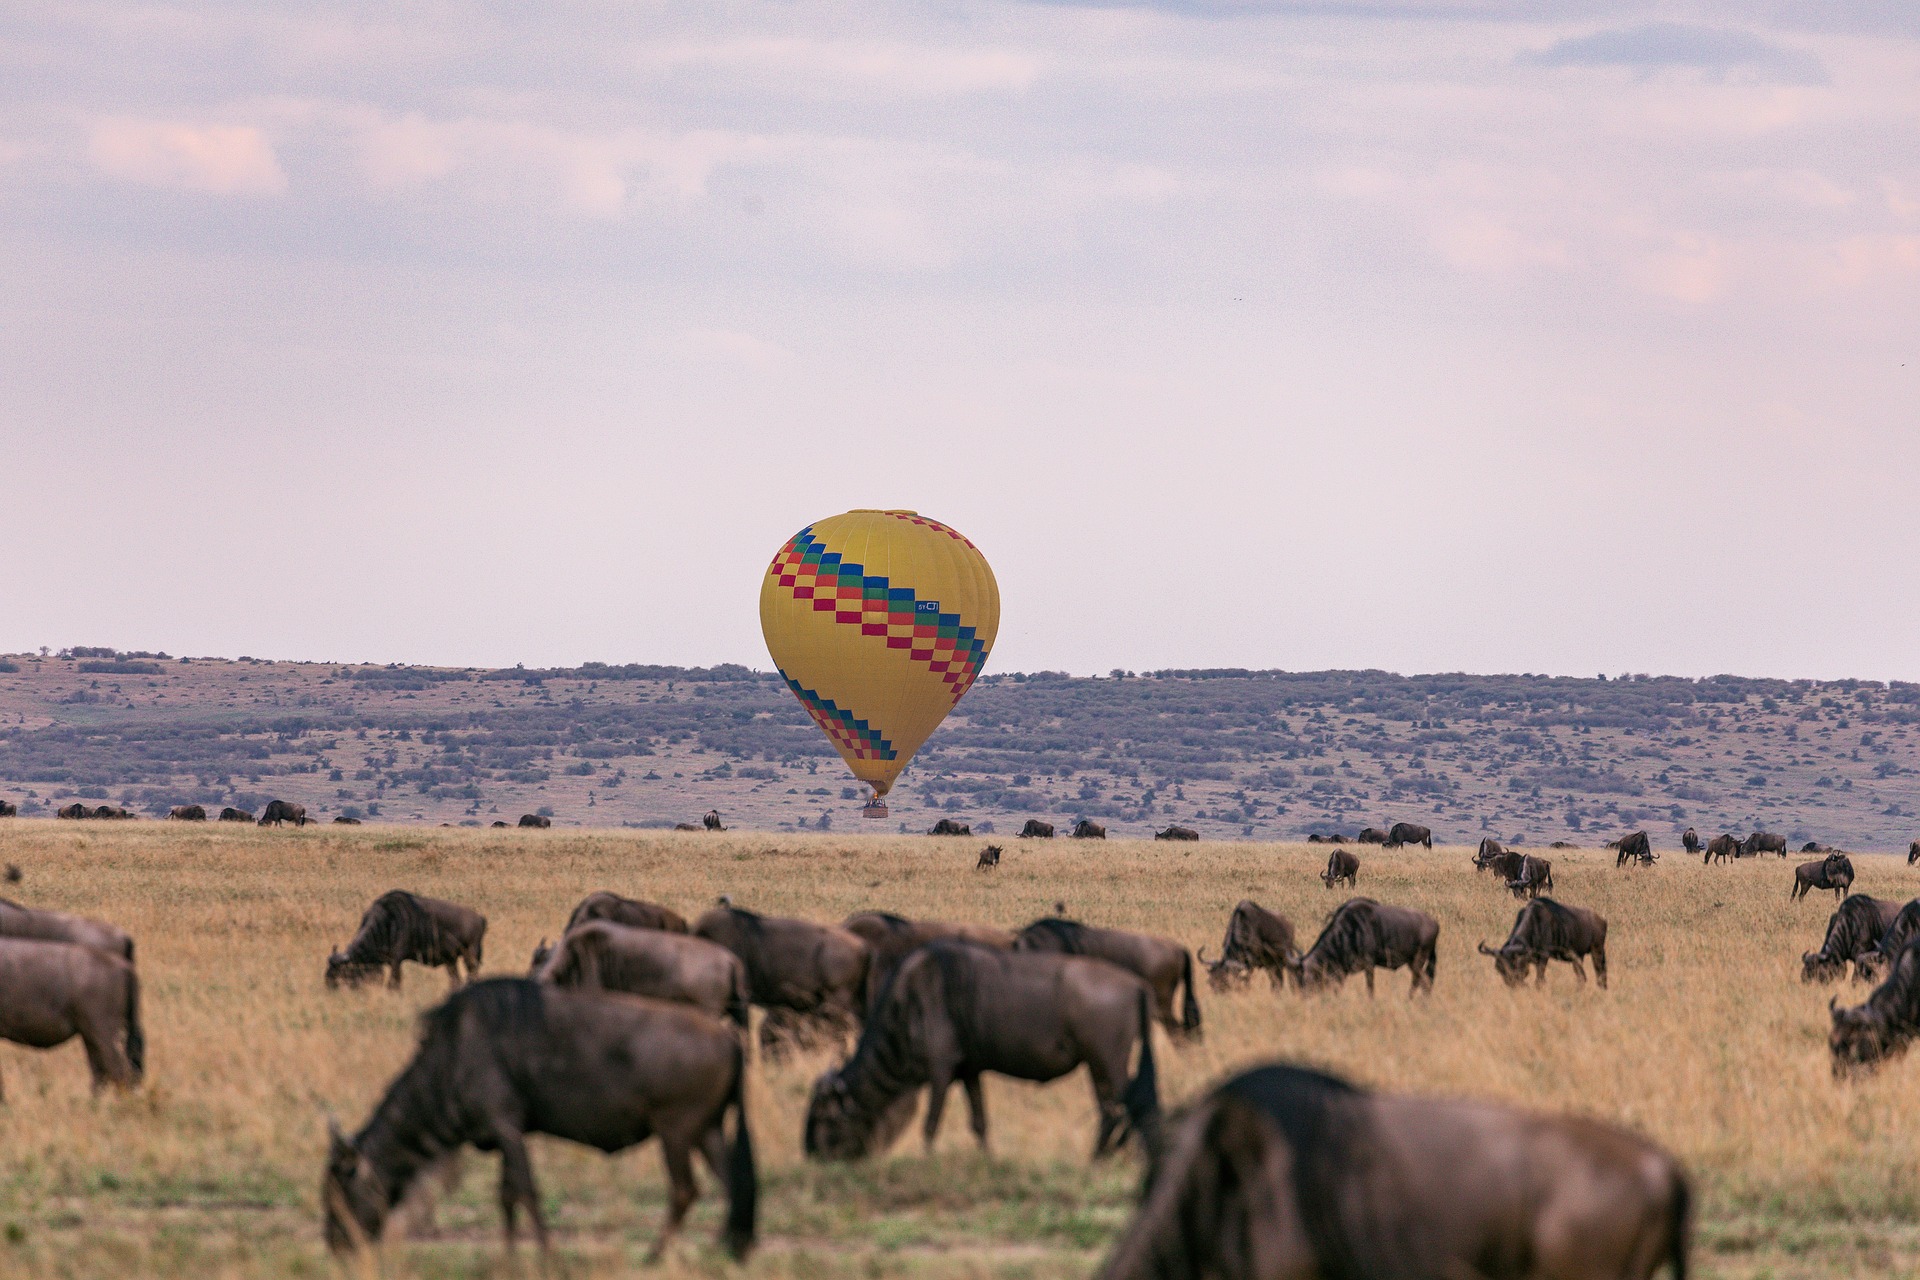 Digital Nomads can also go on safari and not lose internet